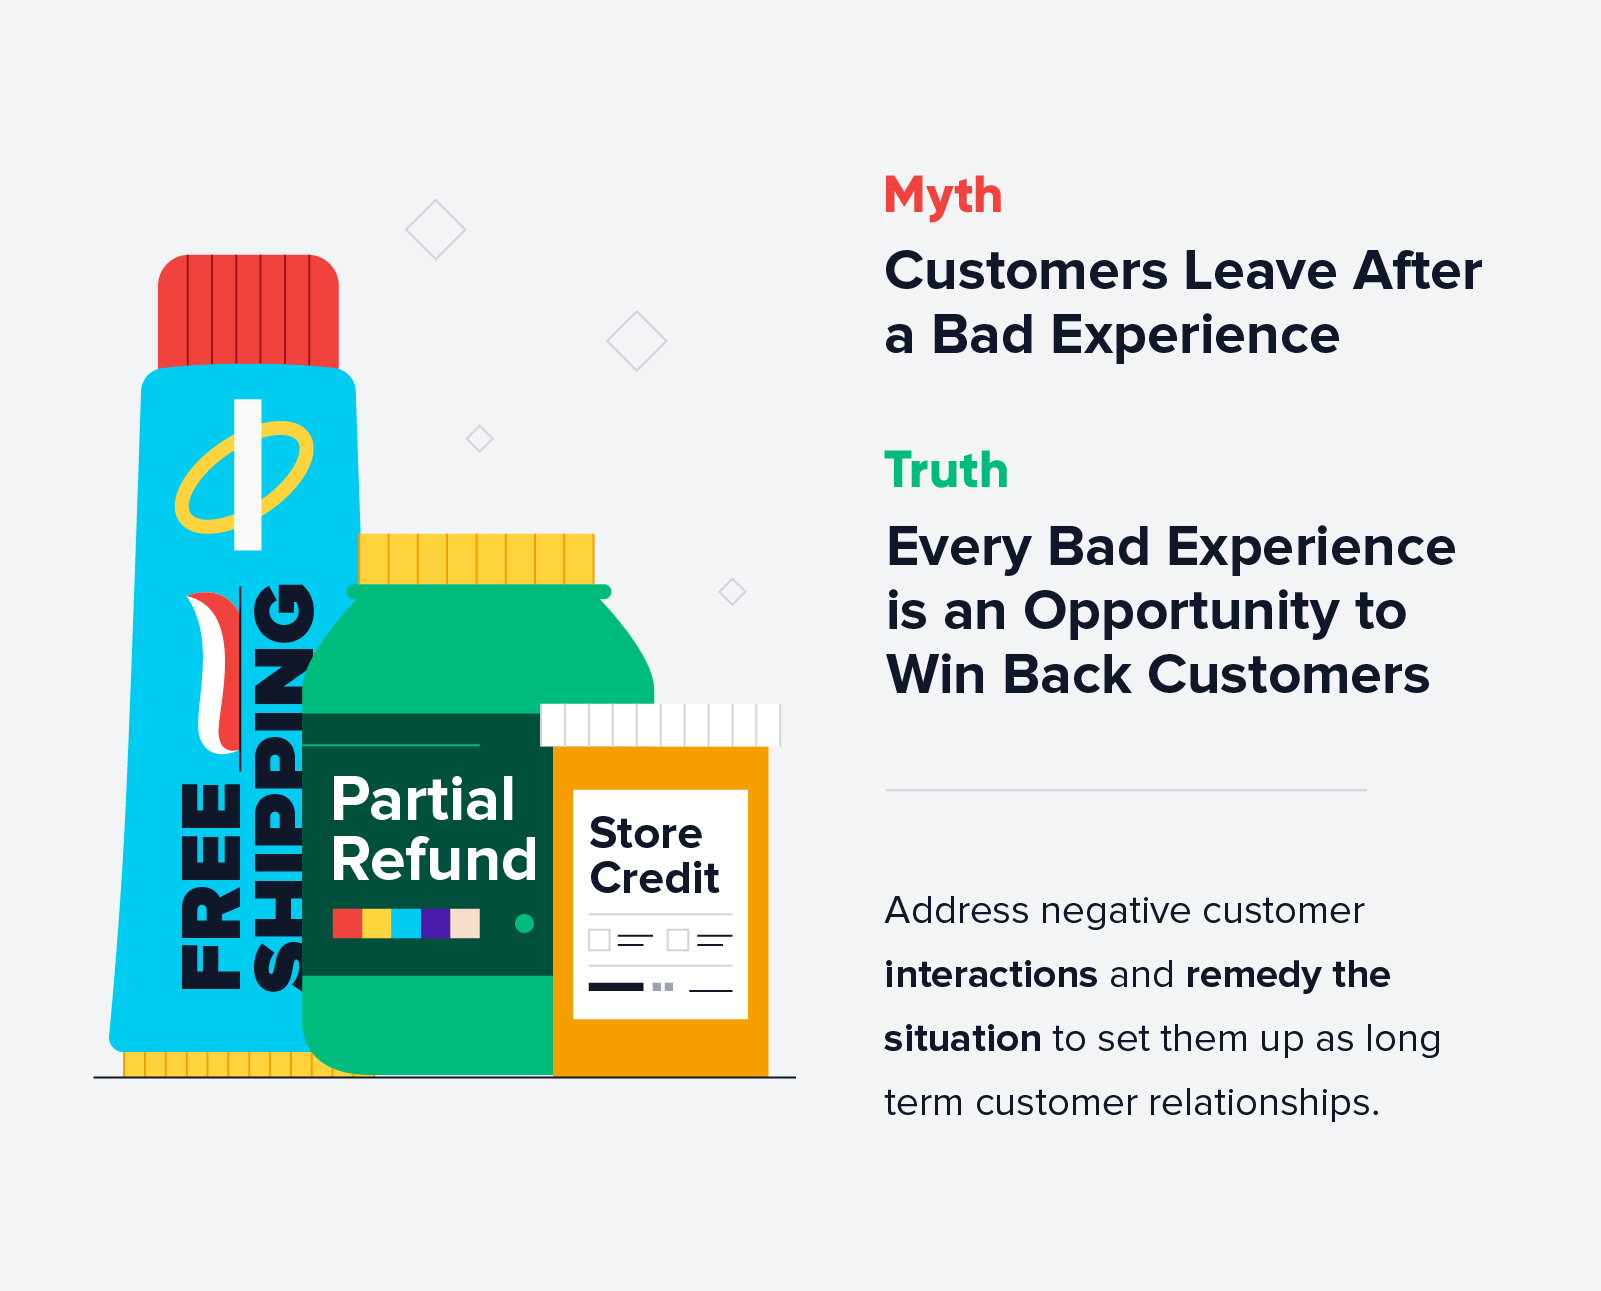 every bad experience is an opportunity to win back customers